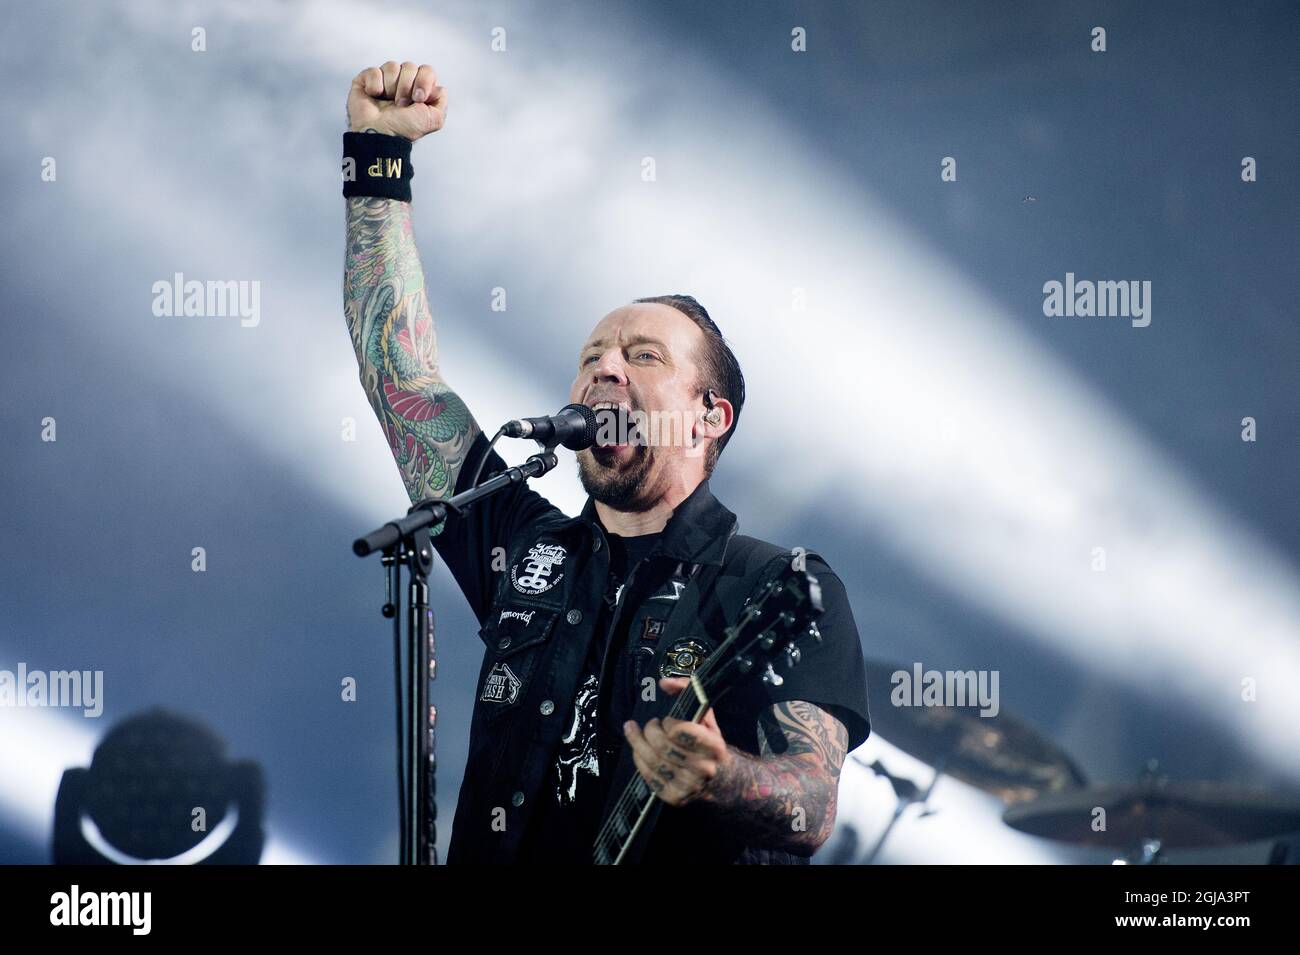 NORRKOPING 2016-07-01 Volbeat, Michael Poulsen on stage at Bravalla Festival in Norrkoping, Sweden, July 01, 2016. Photo: Izabelle Nordfjell / TT code 11460  Stock Photo